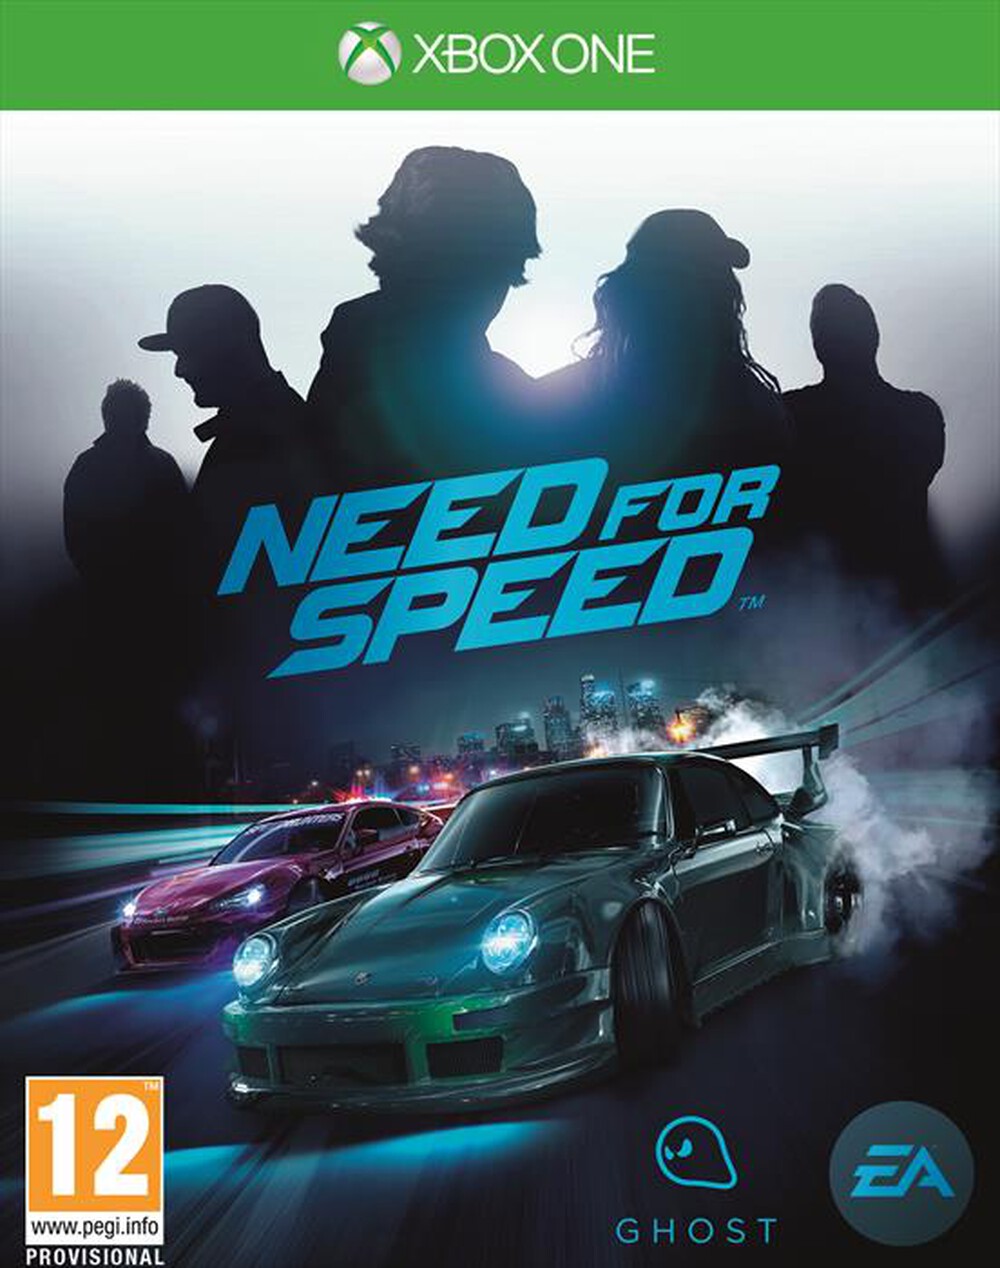 "ELECTRONIC ARTS - Need For Speed Xbox One"